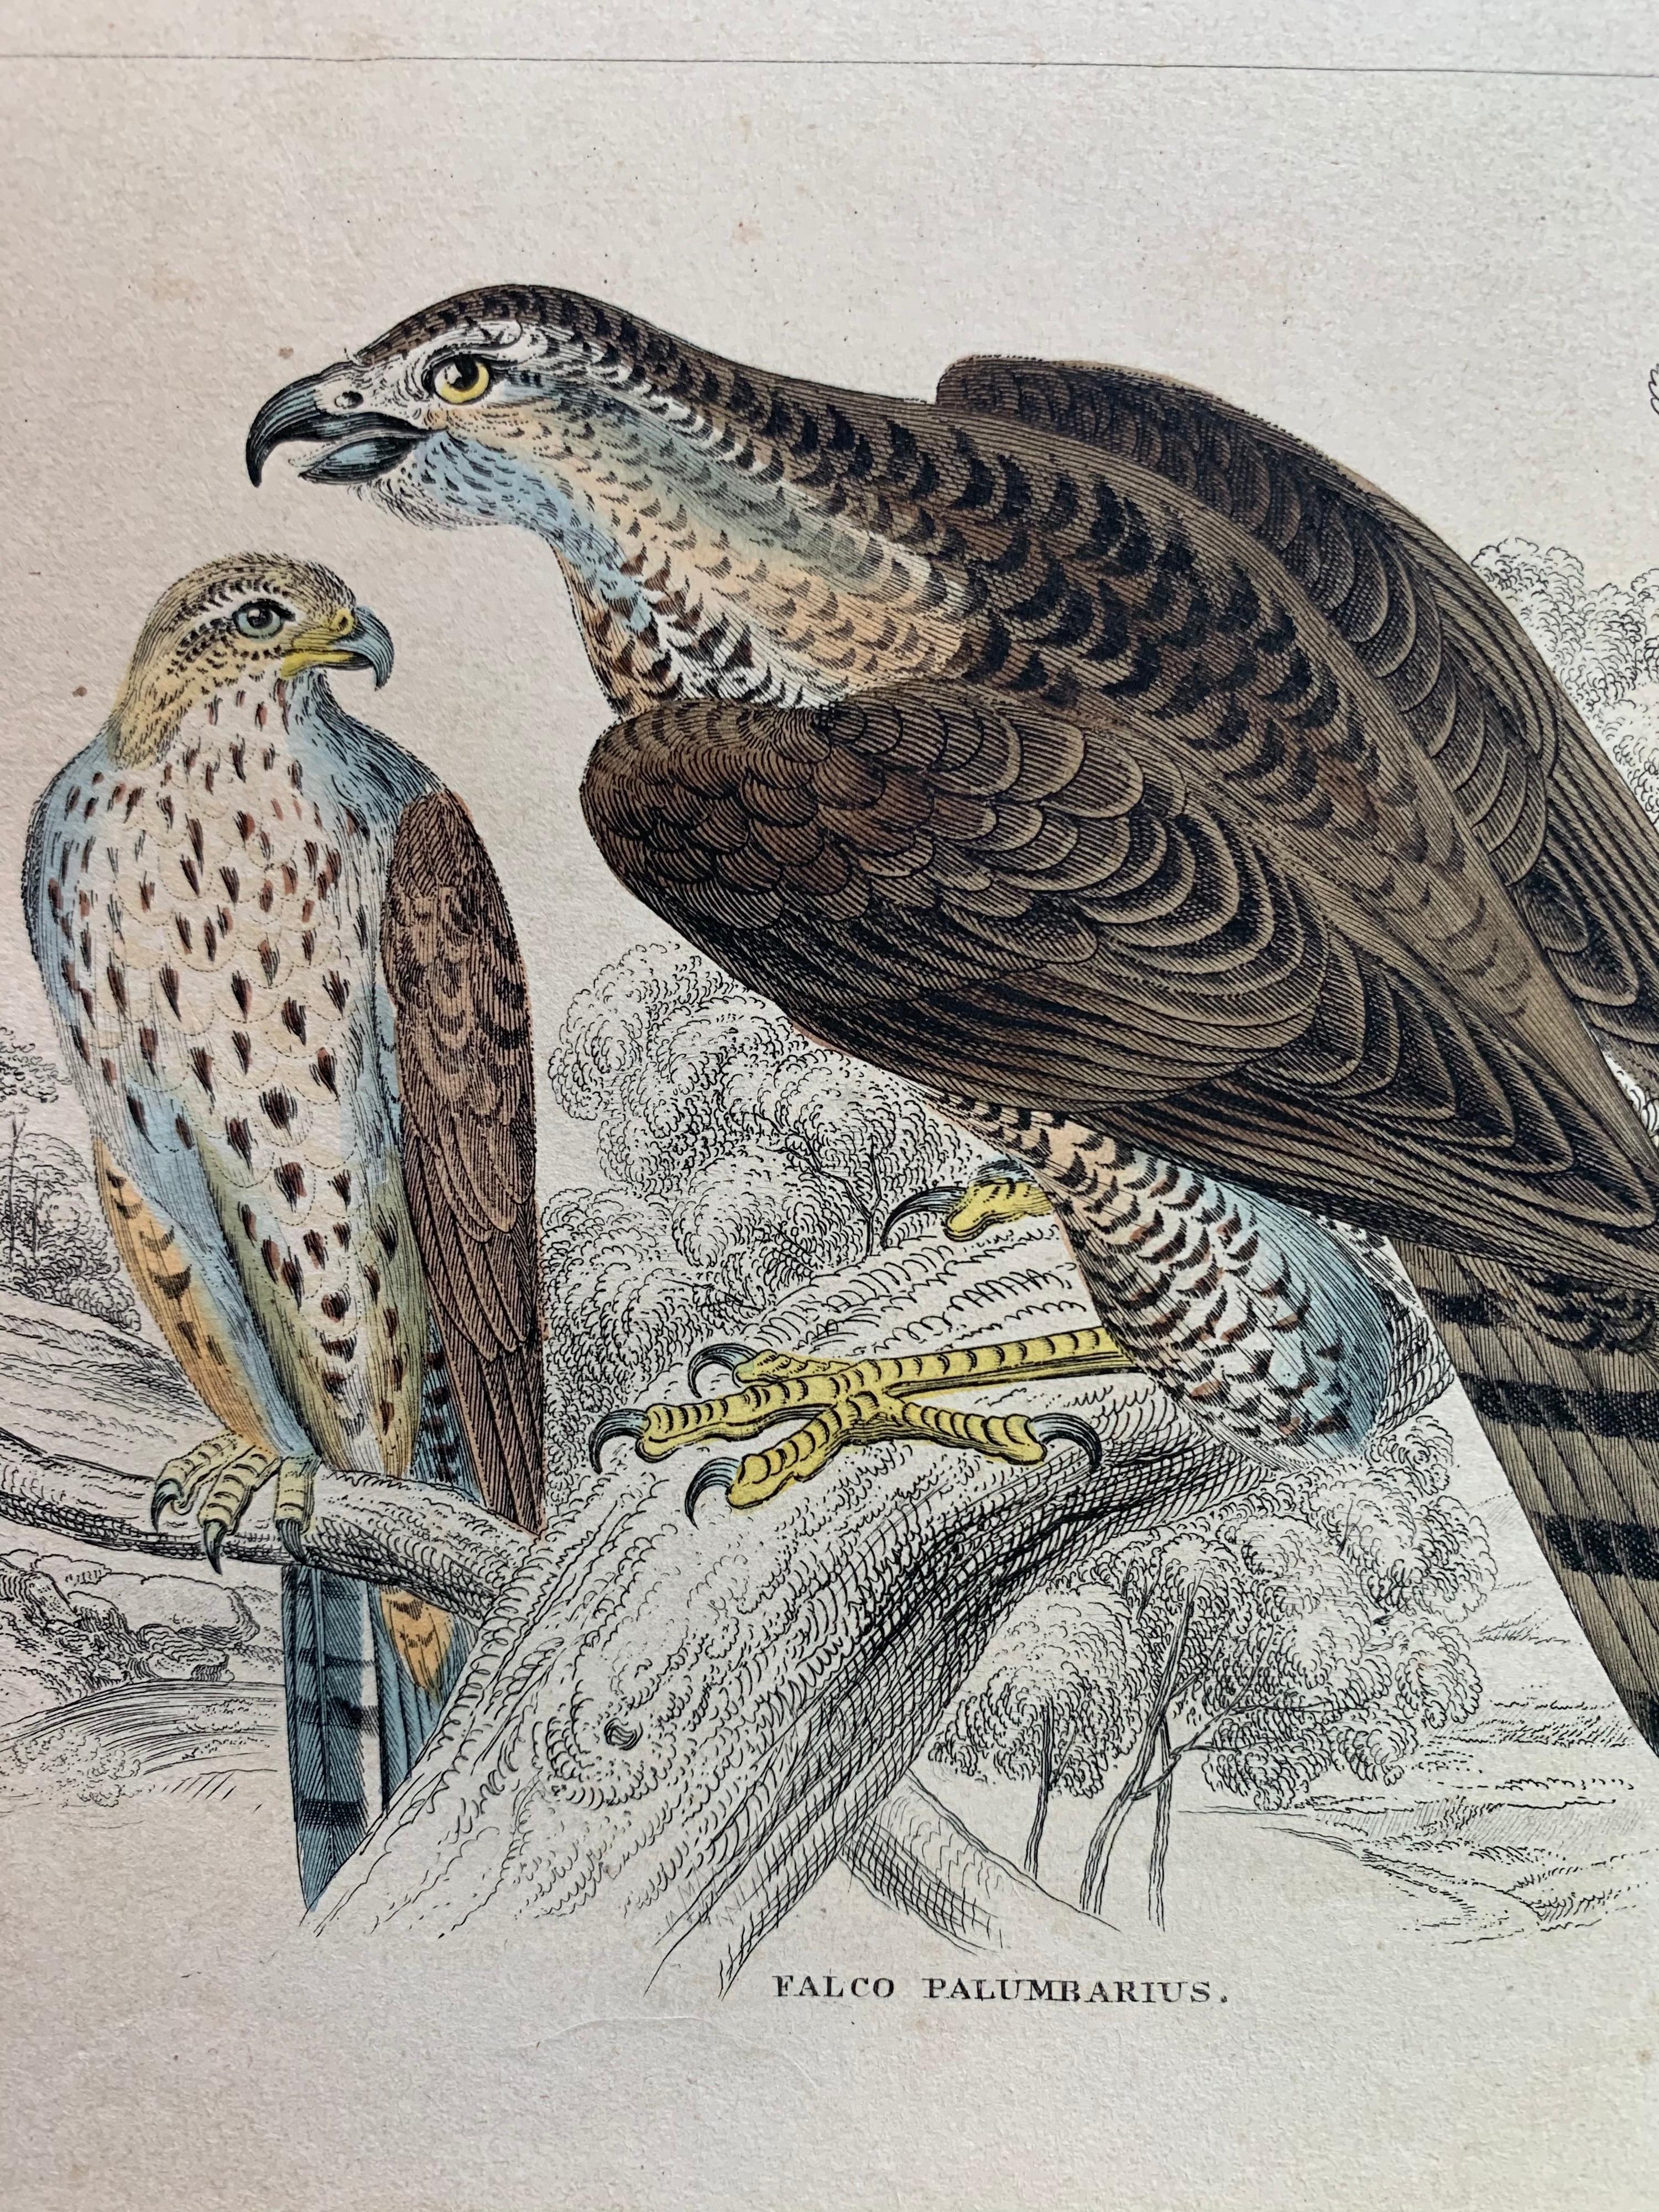 A pair of hand colored prints of birds of prey published in 1840 based on the work of Scottish naturalist, Sir William Jardine, 7th Baronet. Depicting a: falco palumbarius (Falcon), Aquila Albicilla ( White-Tailed Eagle ), Aquila Chrysaeta ( Golden